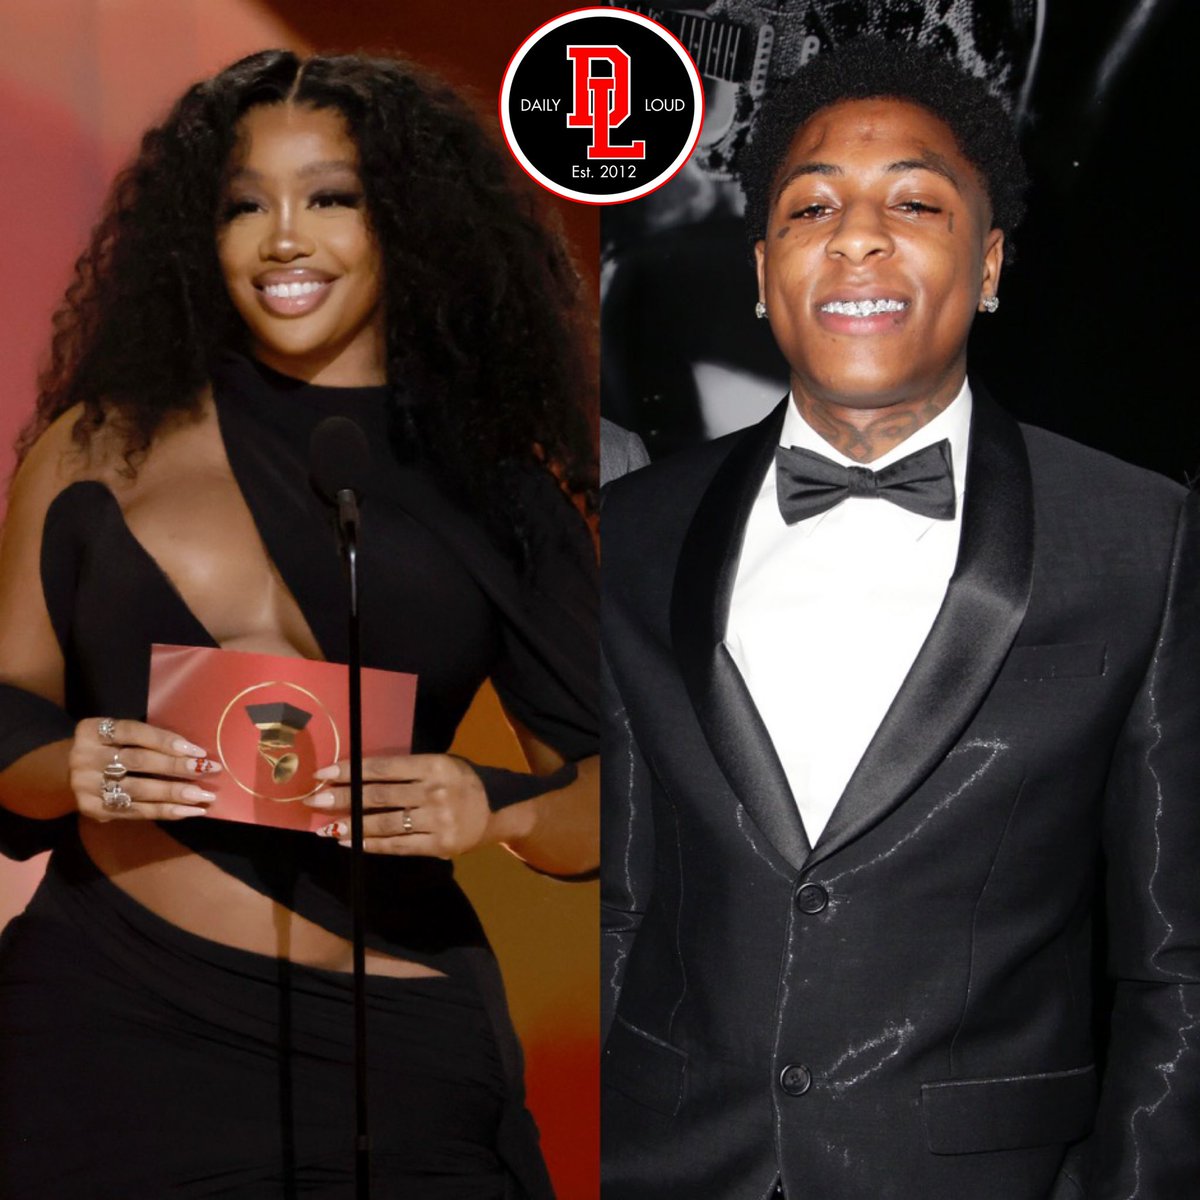 SZA says NBA YoungBoy is “Black Excellence”